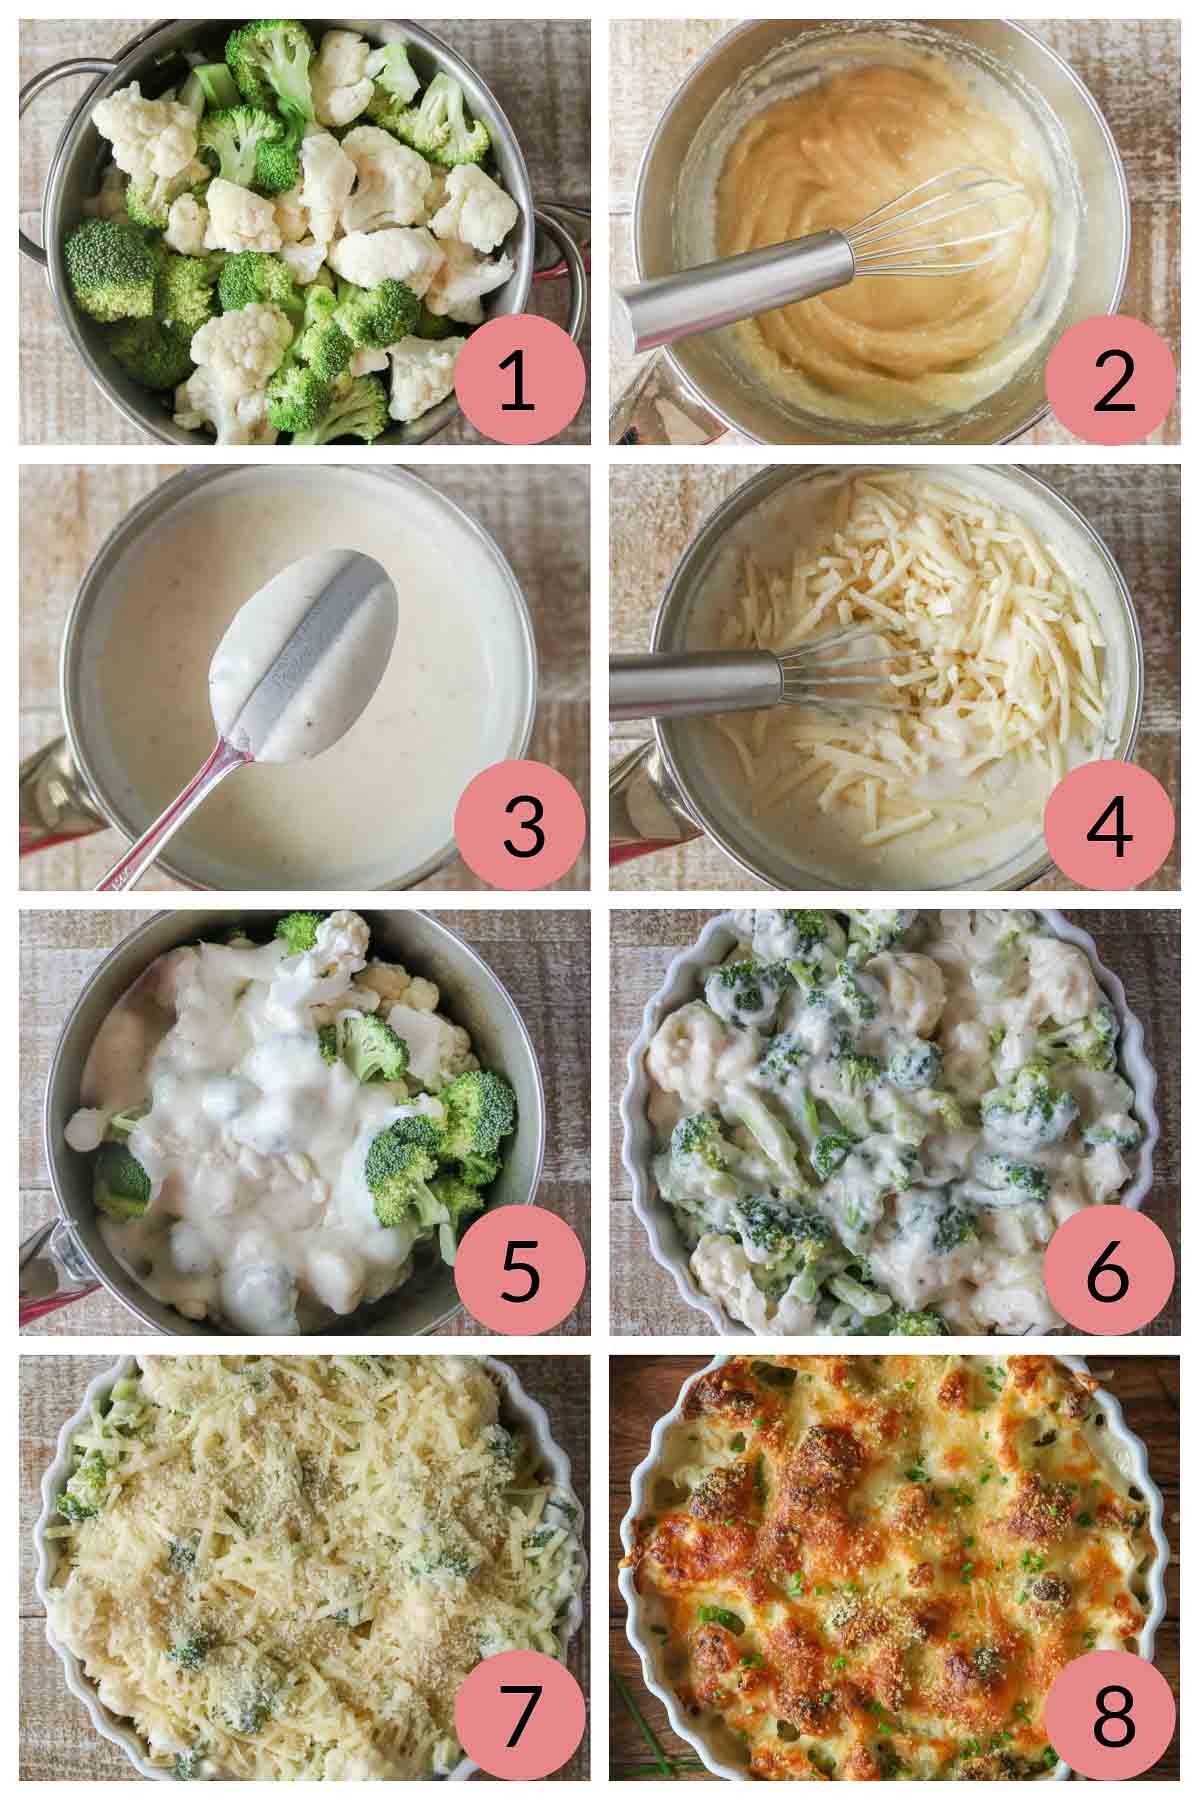 Collage of steps to make a vegetable au gratin recipe with broccoli and cauliflower.